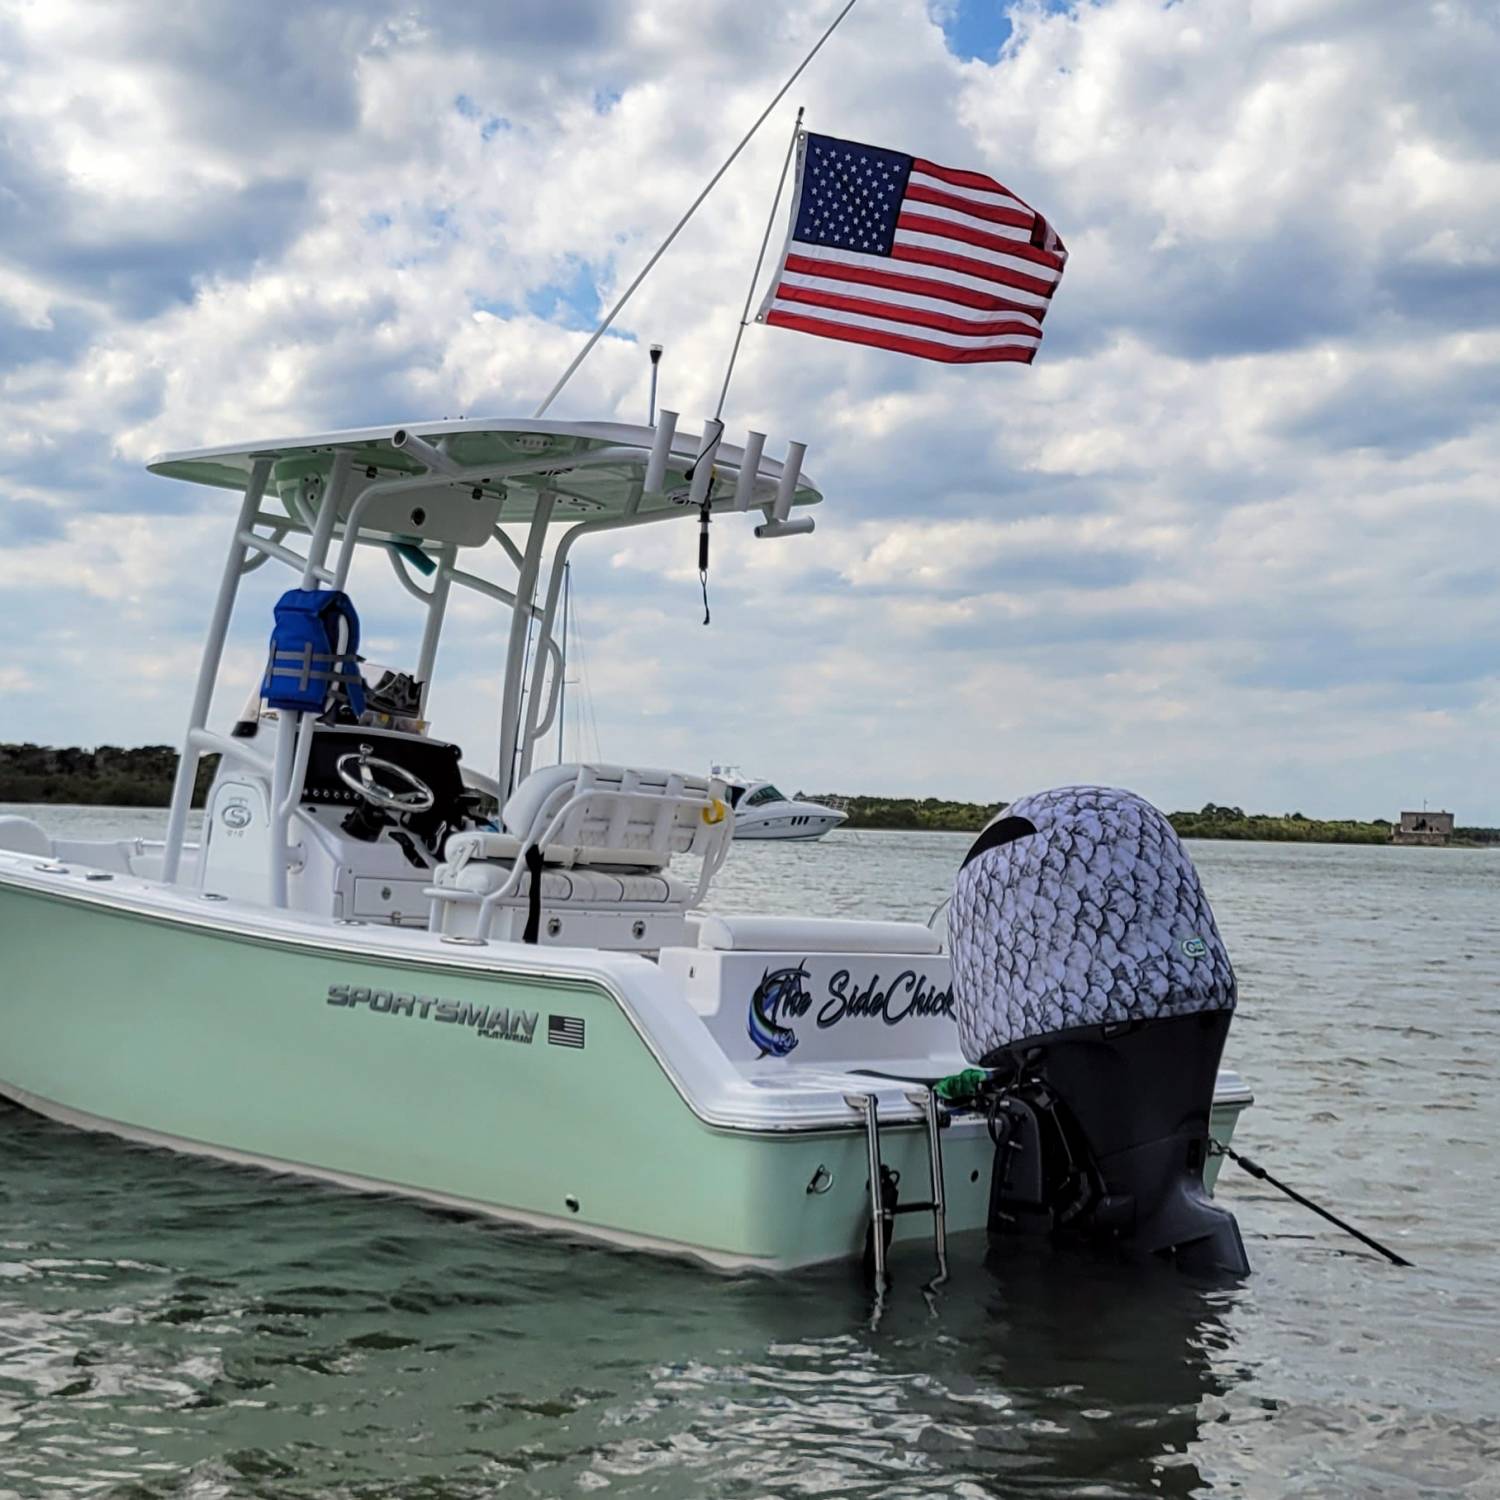 Title: America at the Fort! - On board their Sportsman Open 212 Center Console - Location: Matanzas Inlet, Florida. Participating in the Photo Contest #SportsmanApril2023